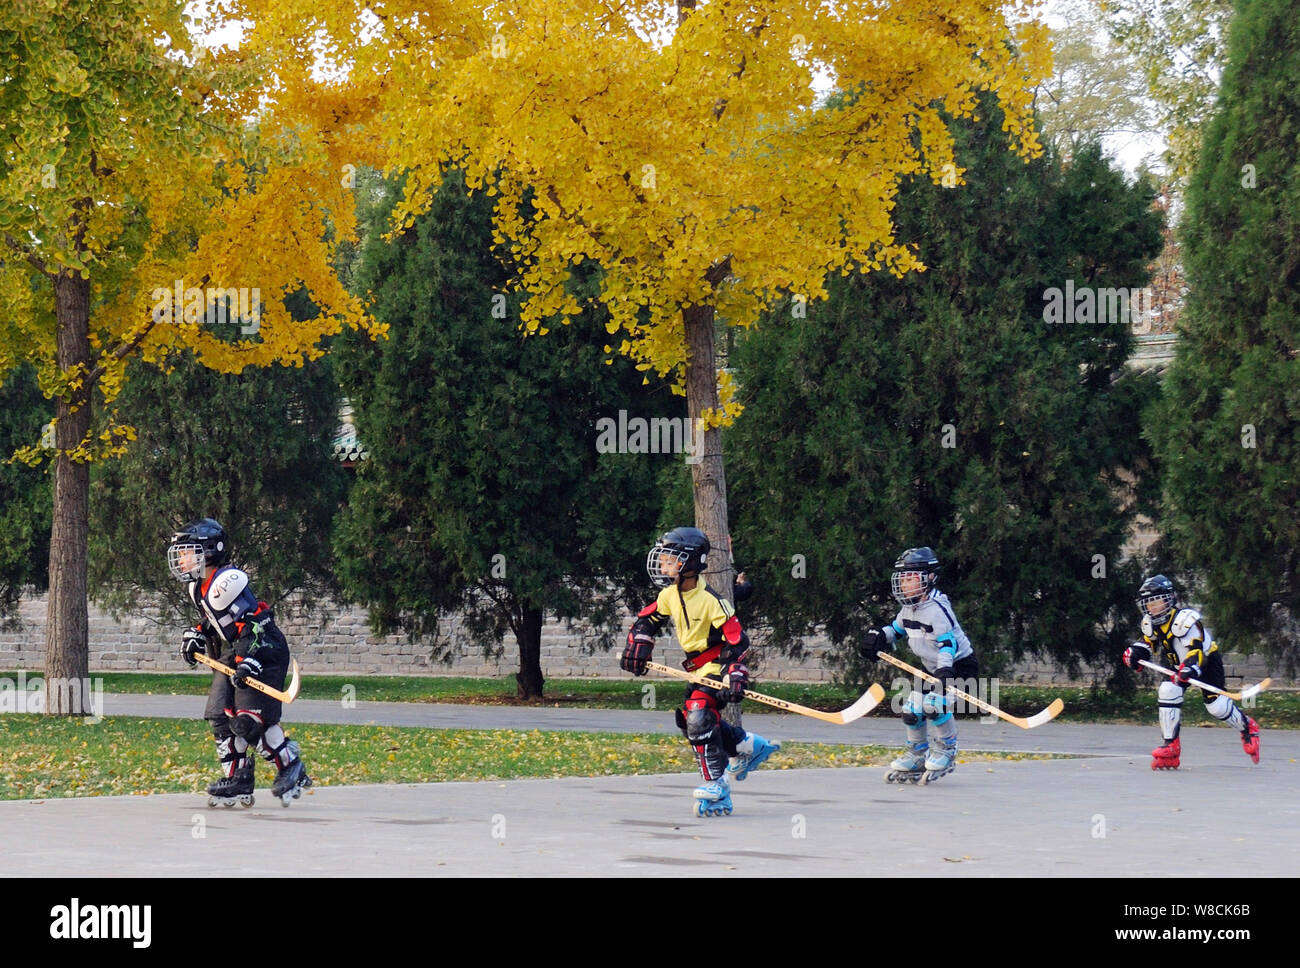 Young Chinese boys learn skills of ice hockey at Ditan Park in Beijing, China, 8 November 2015.   Ice hockey and skiing become increasingly popular am Stock Photo